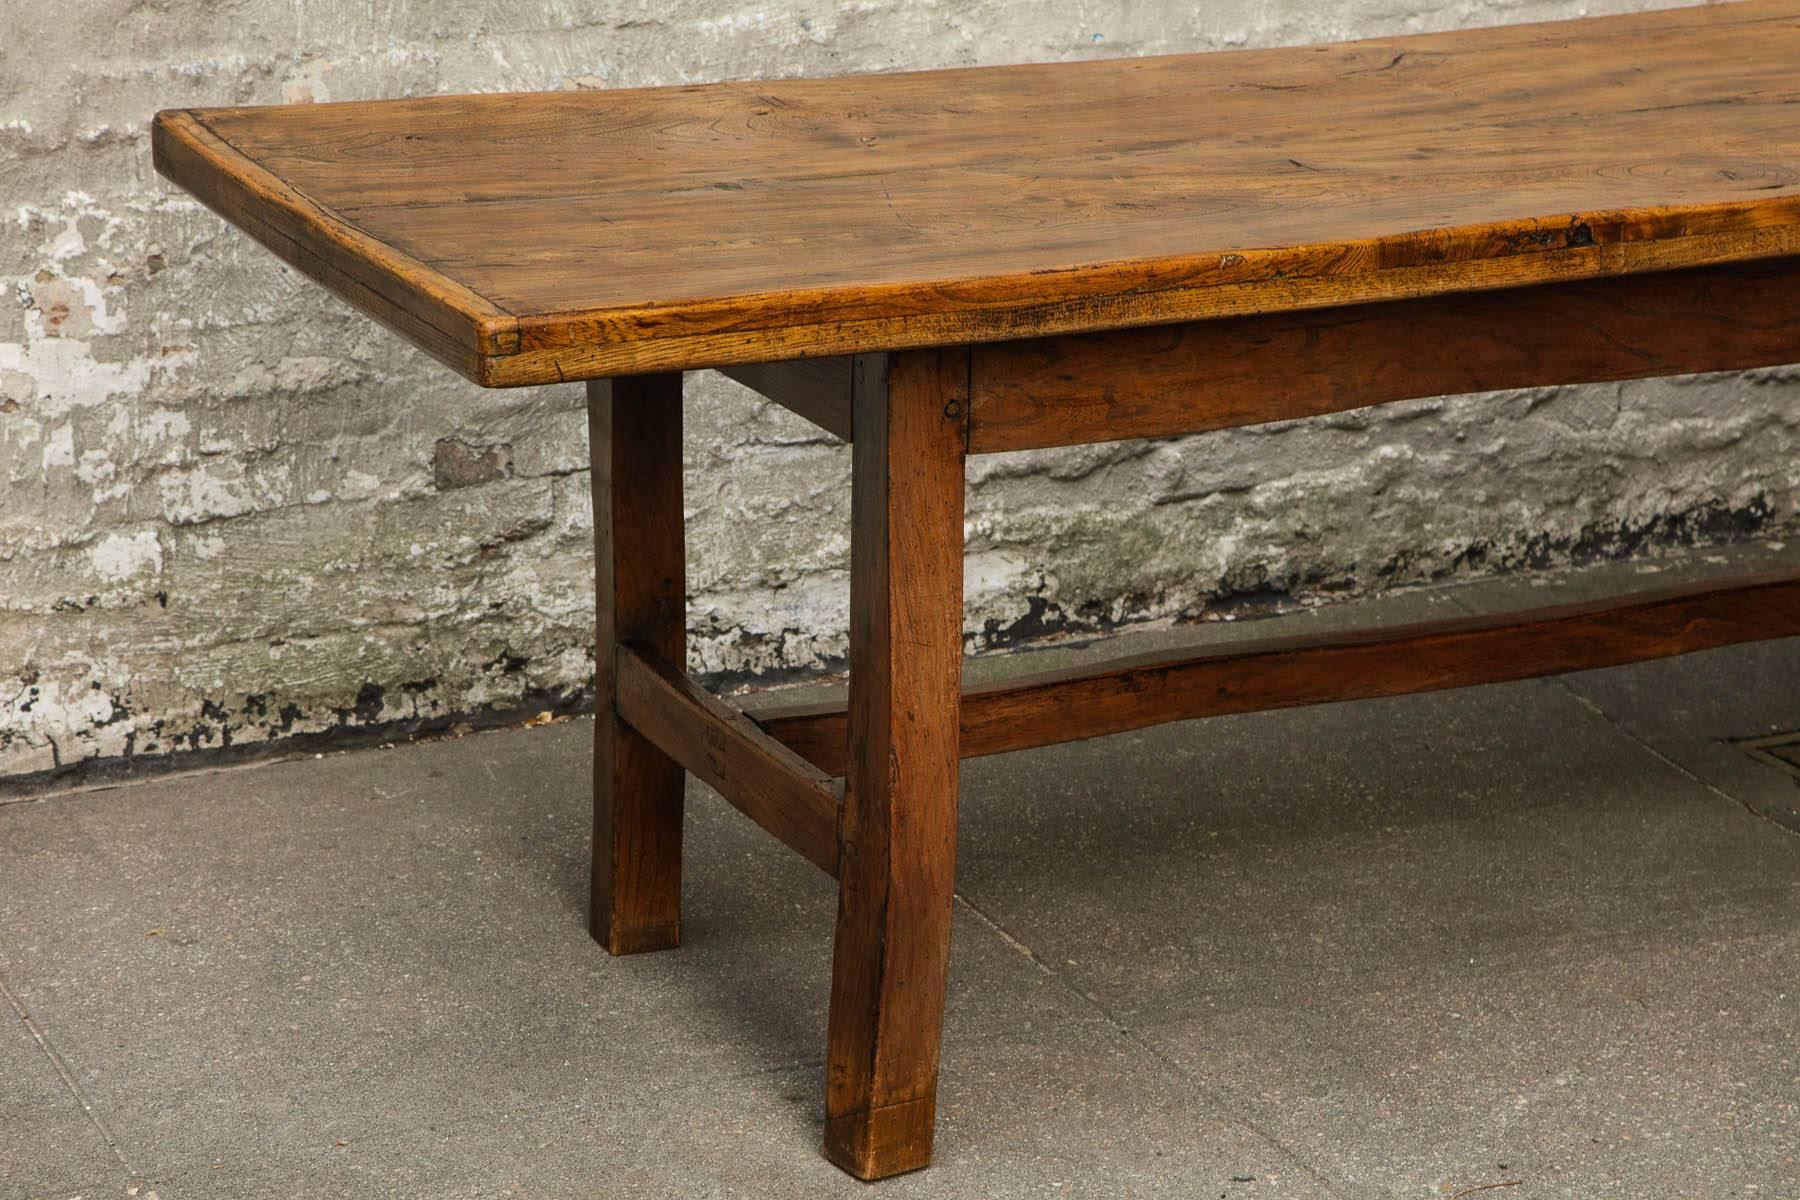 An 18th century Welsh farm house table having beautiful rich patina and striking grain.  Thick top of two planks with generous over-hang on square legs joined by long H-stretcher.  Simple, strong architectural lines.